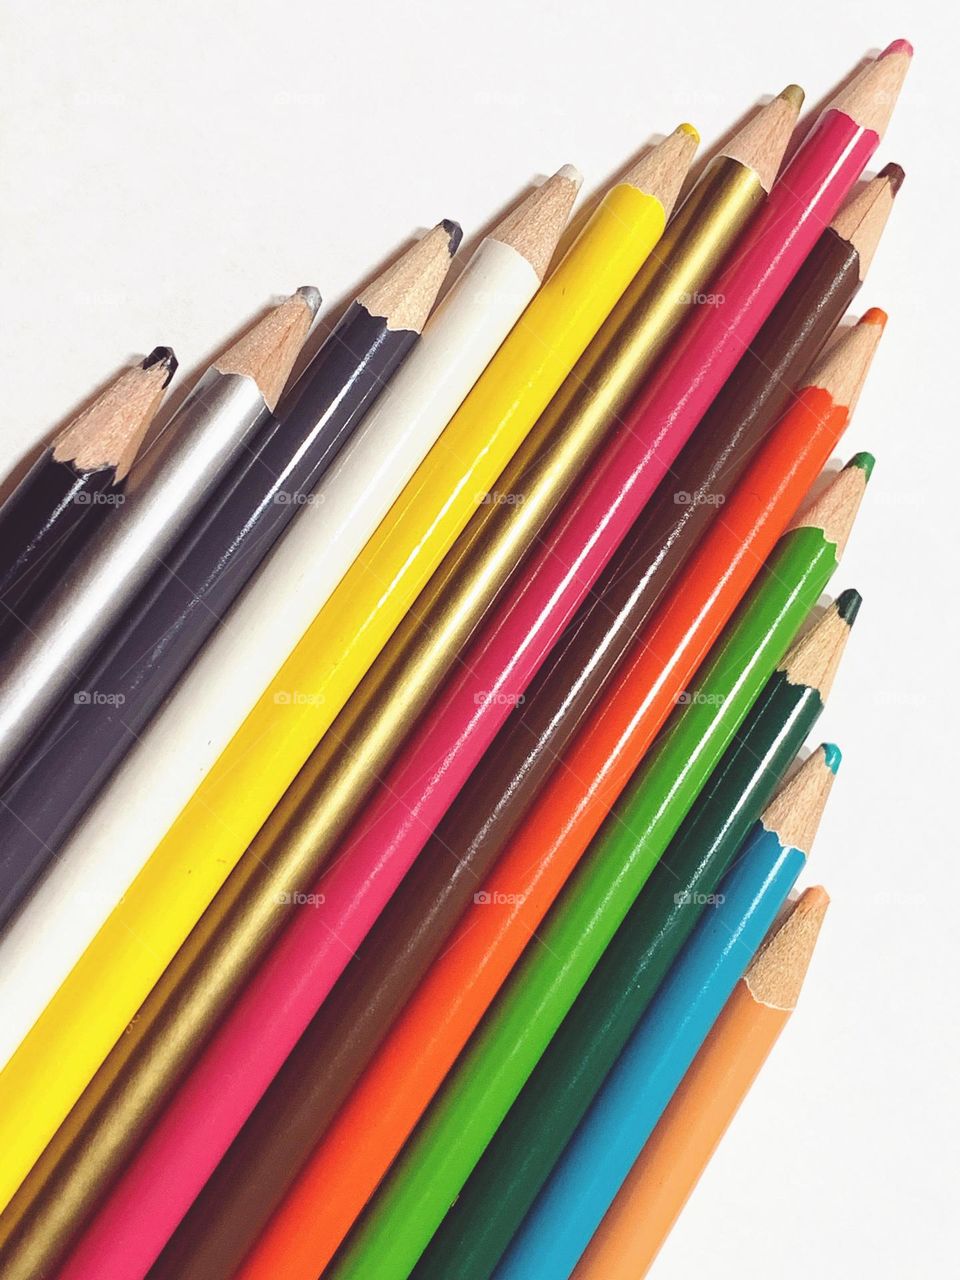 Colored pencils in white background.